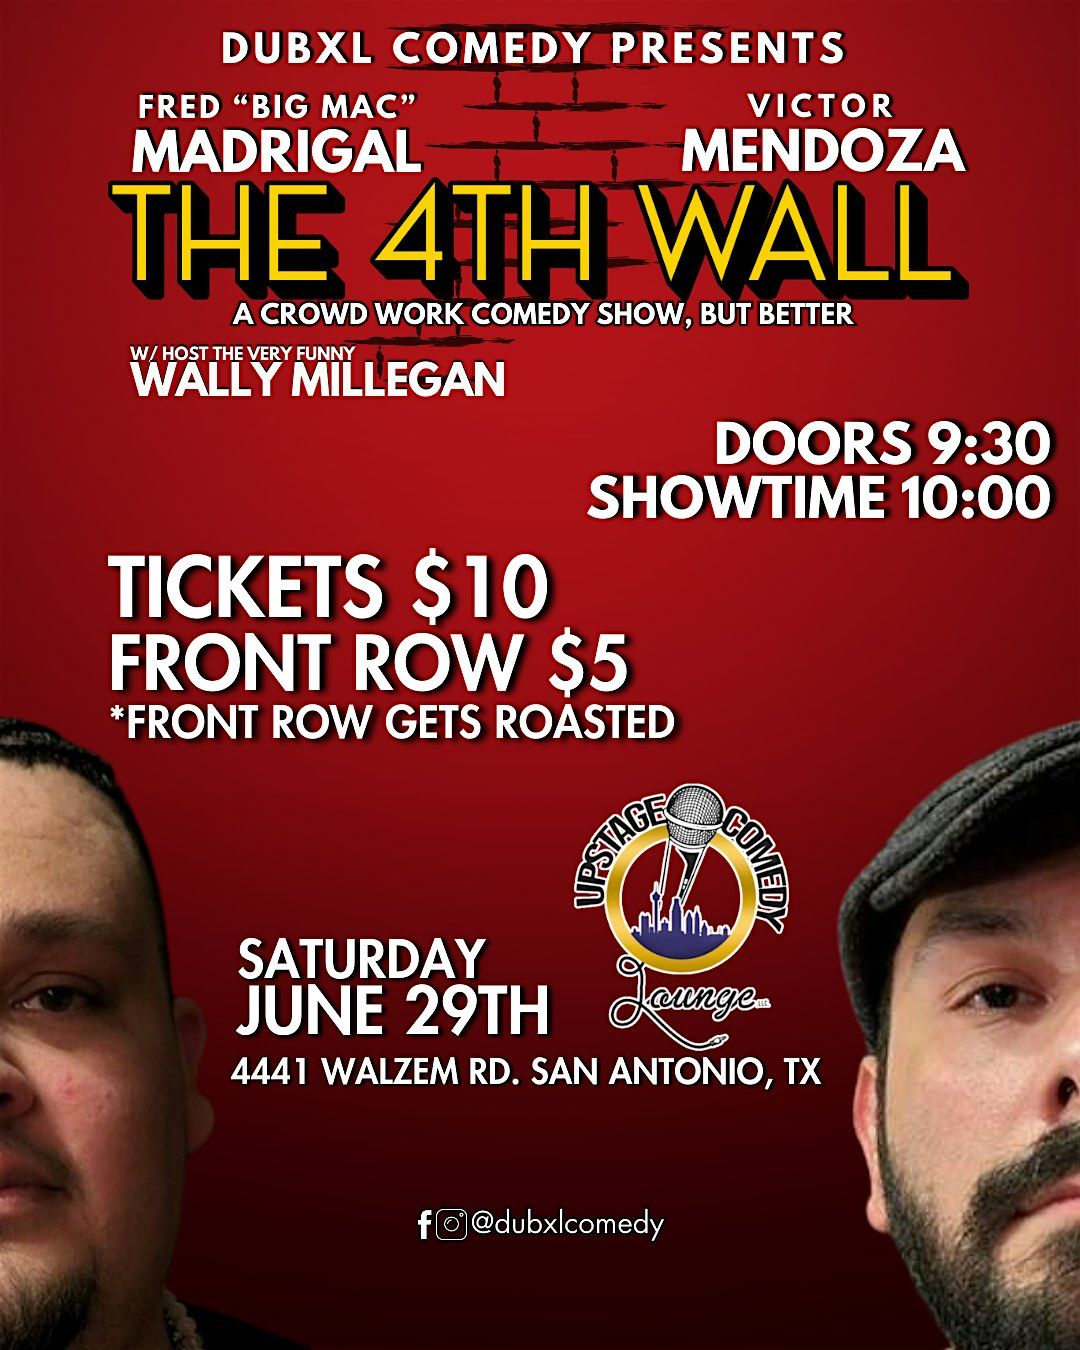 THE 4TH WALL - A CROWDWORK COMEDY SHOW, BUT BETTER